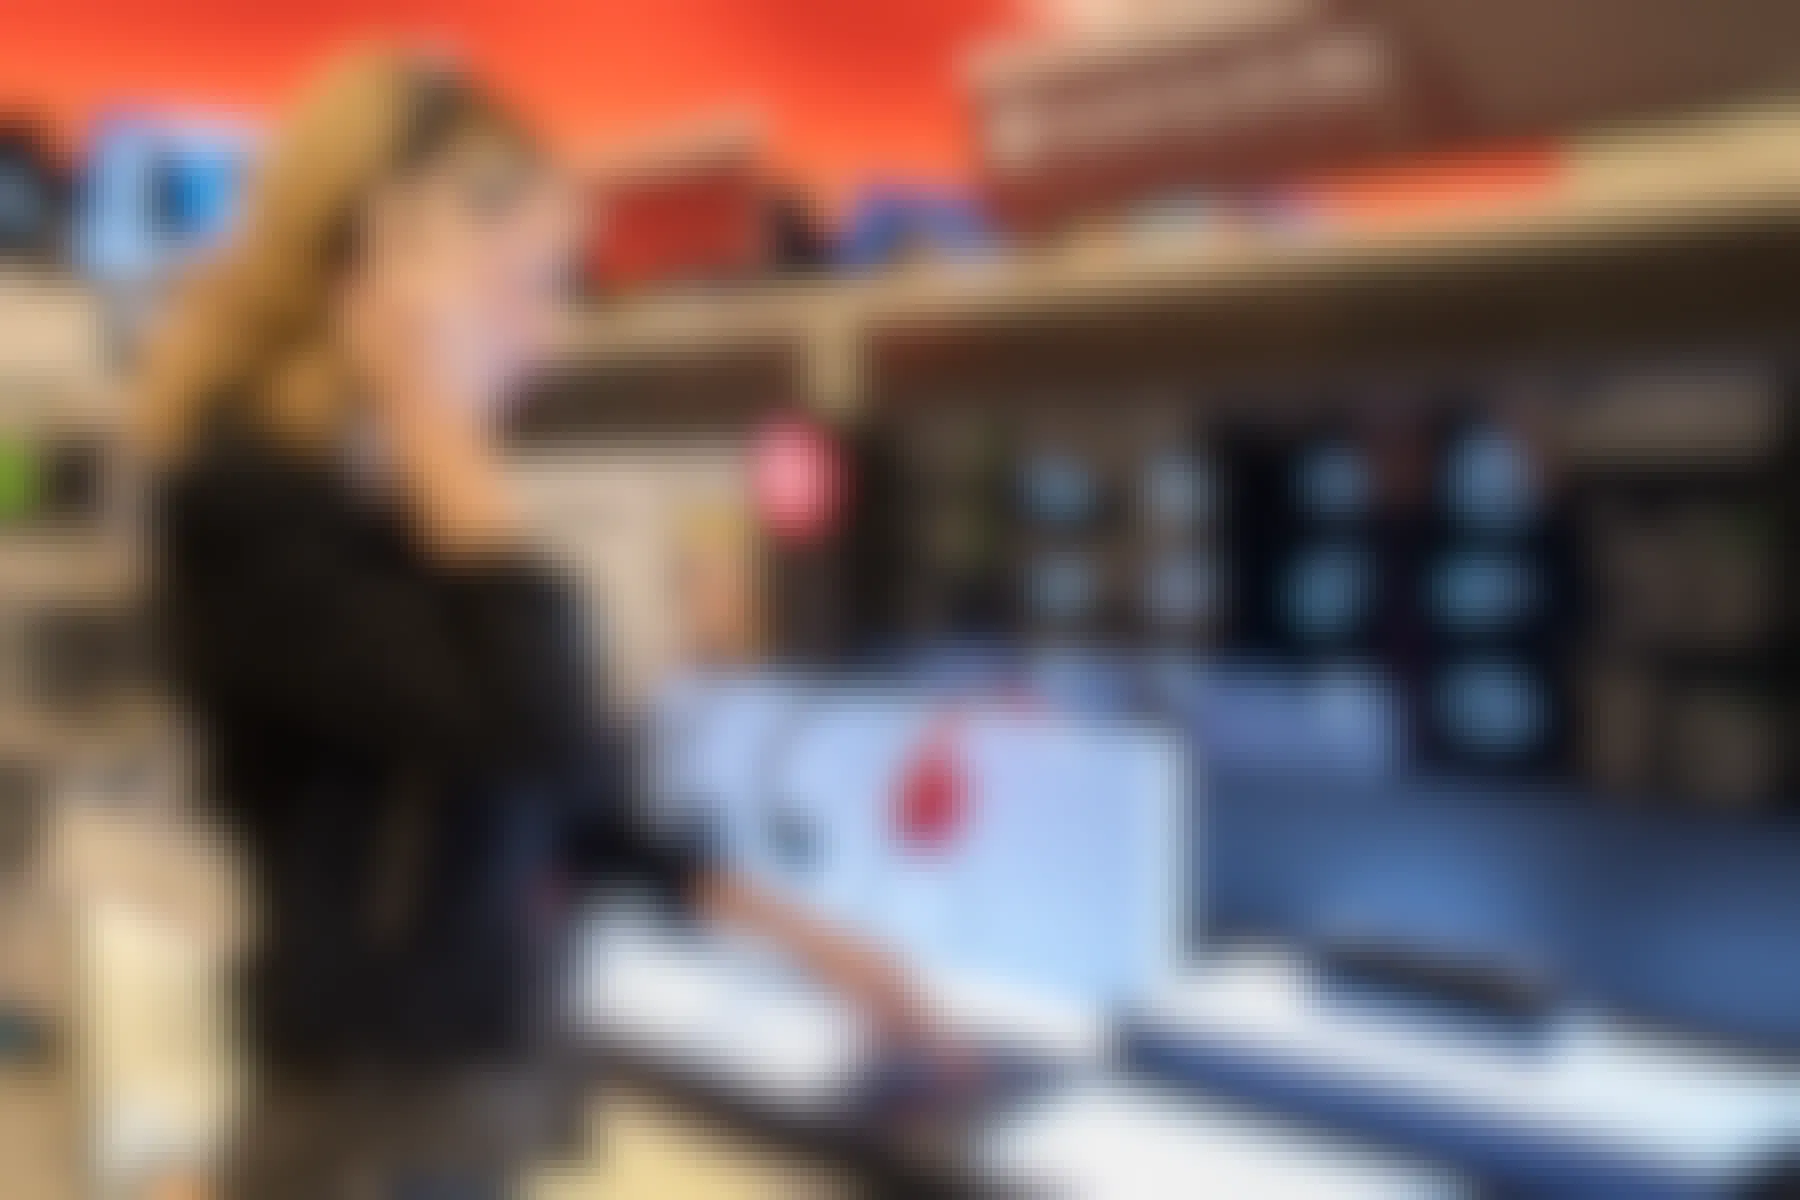 A woman standing at the Beats by Dre display, testing some headphones in the electronics section at Target.